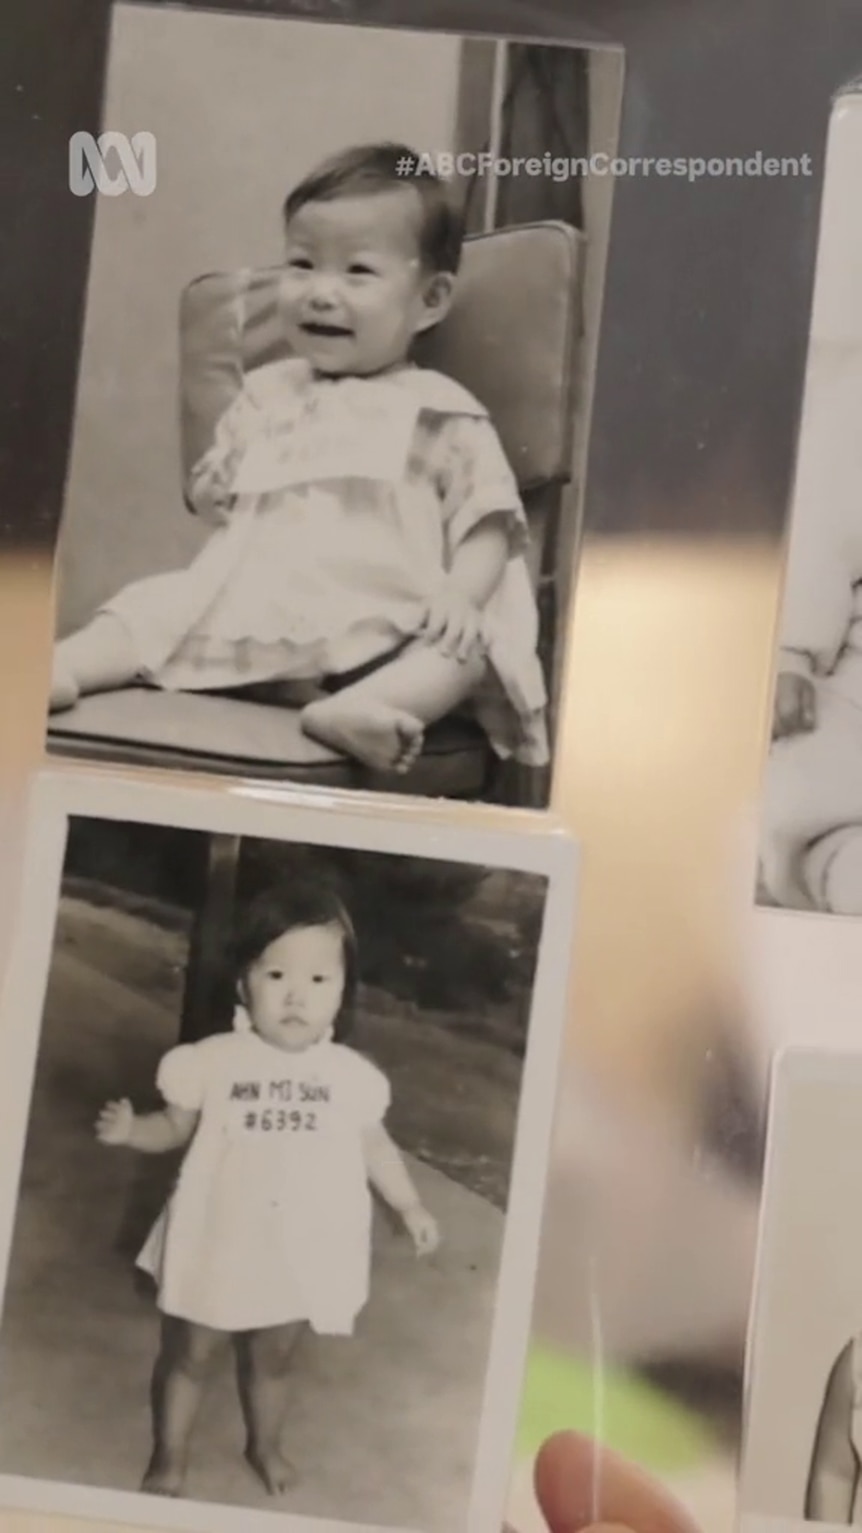 Two black and white photos show an Asian baby in a white dress or oversized t-shirt